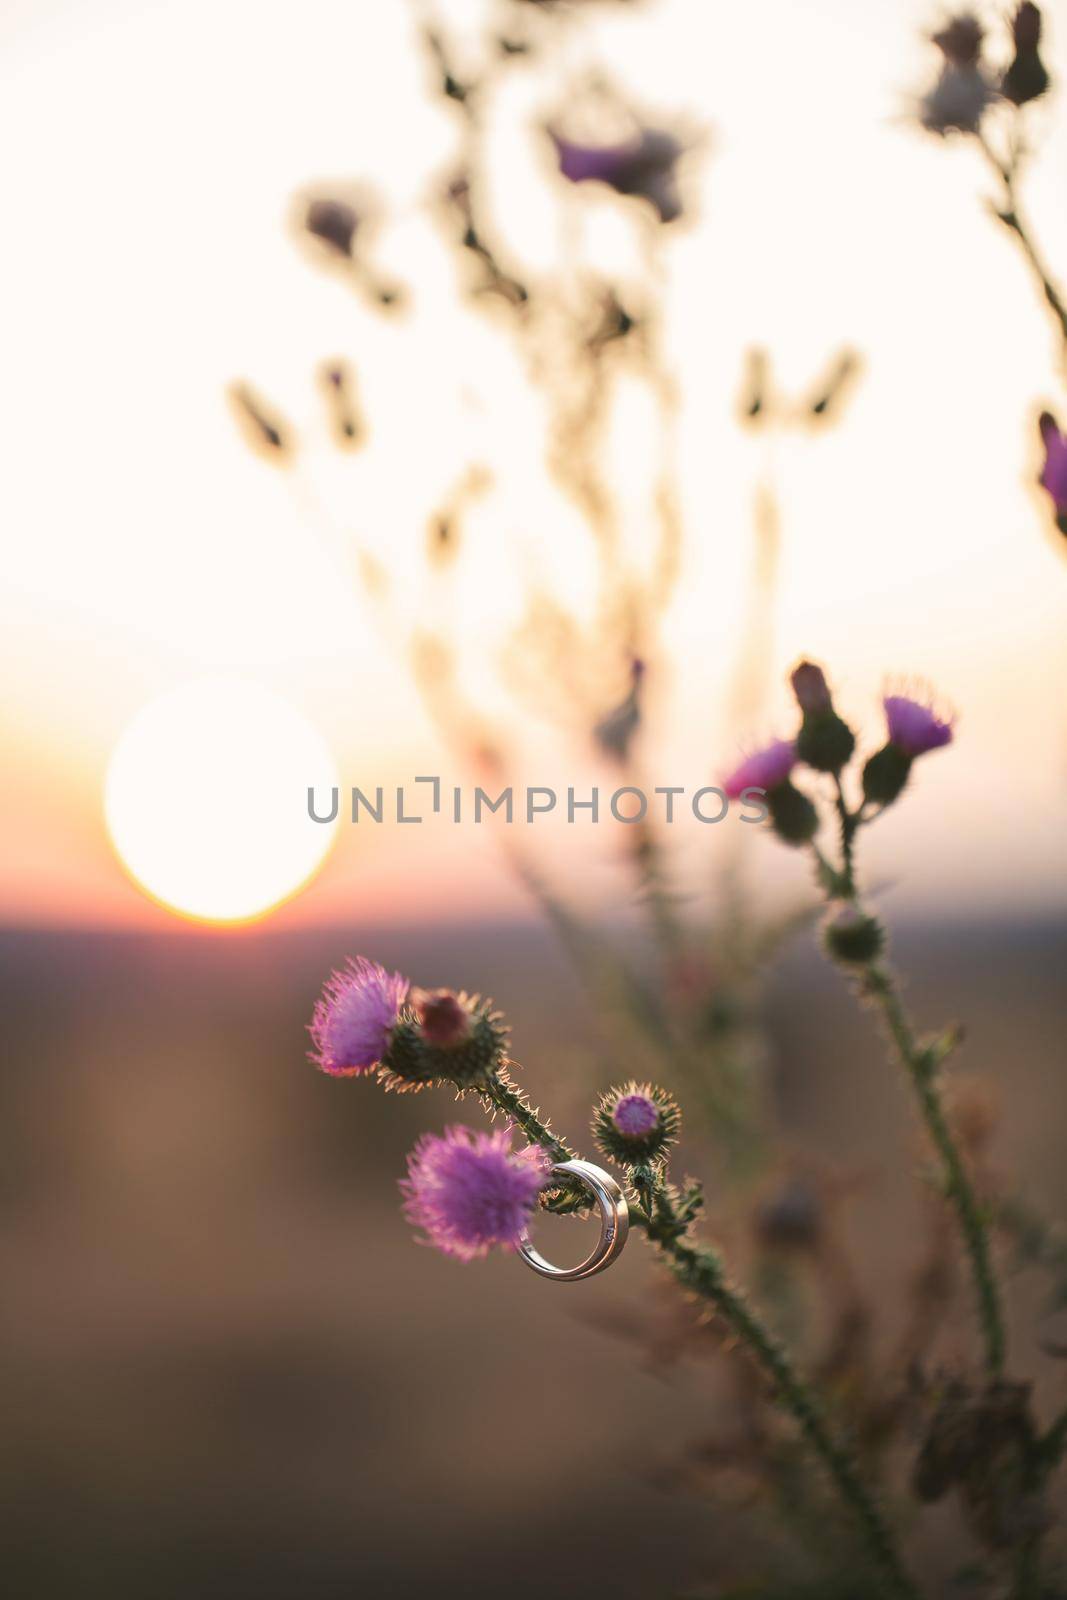 Wedding rings hang on a flower against the background of the sunset